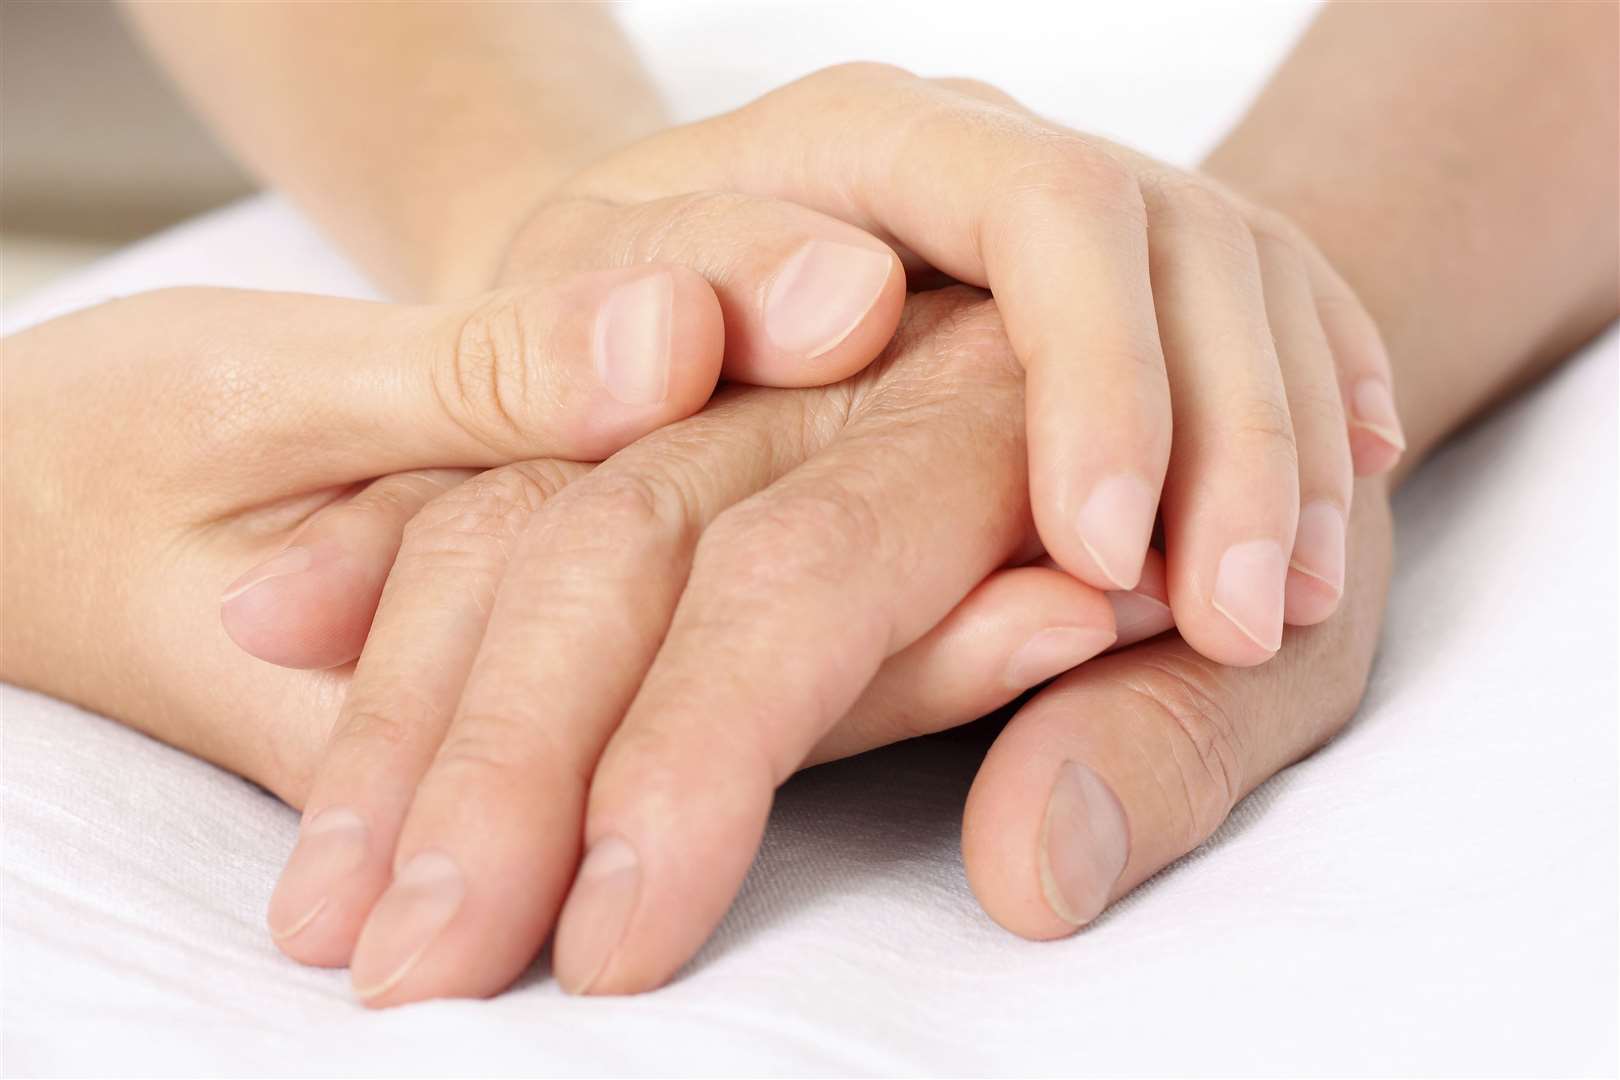 Soothing hands in a care home. Picture: Getty Images/iStockphoto